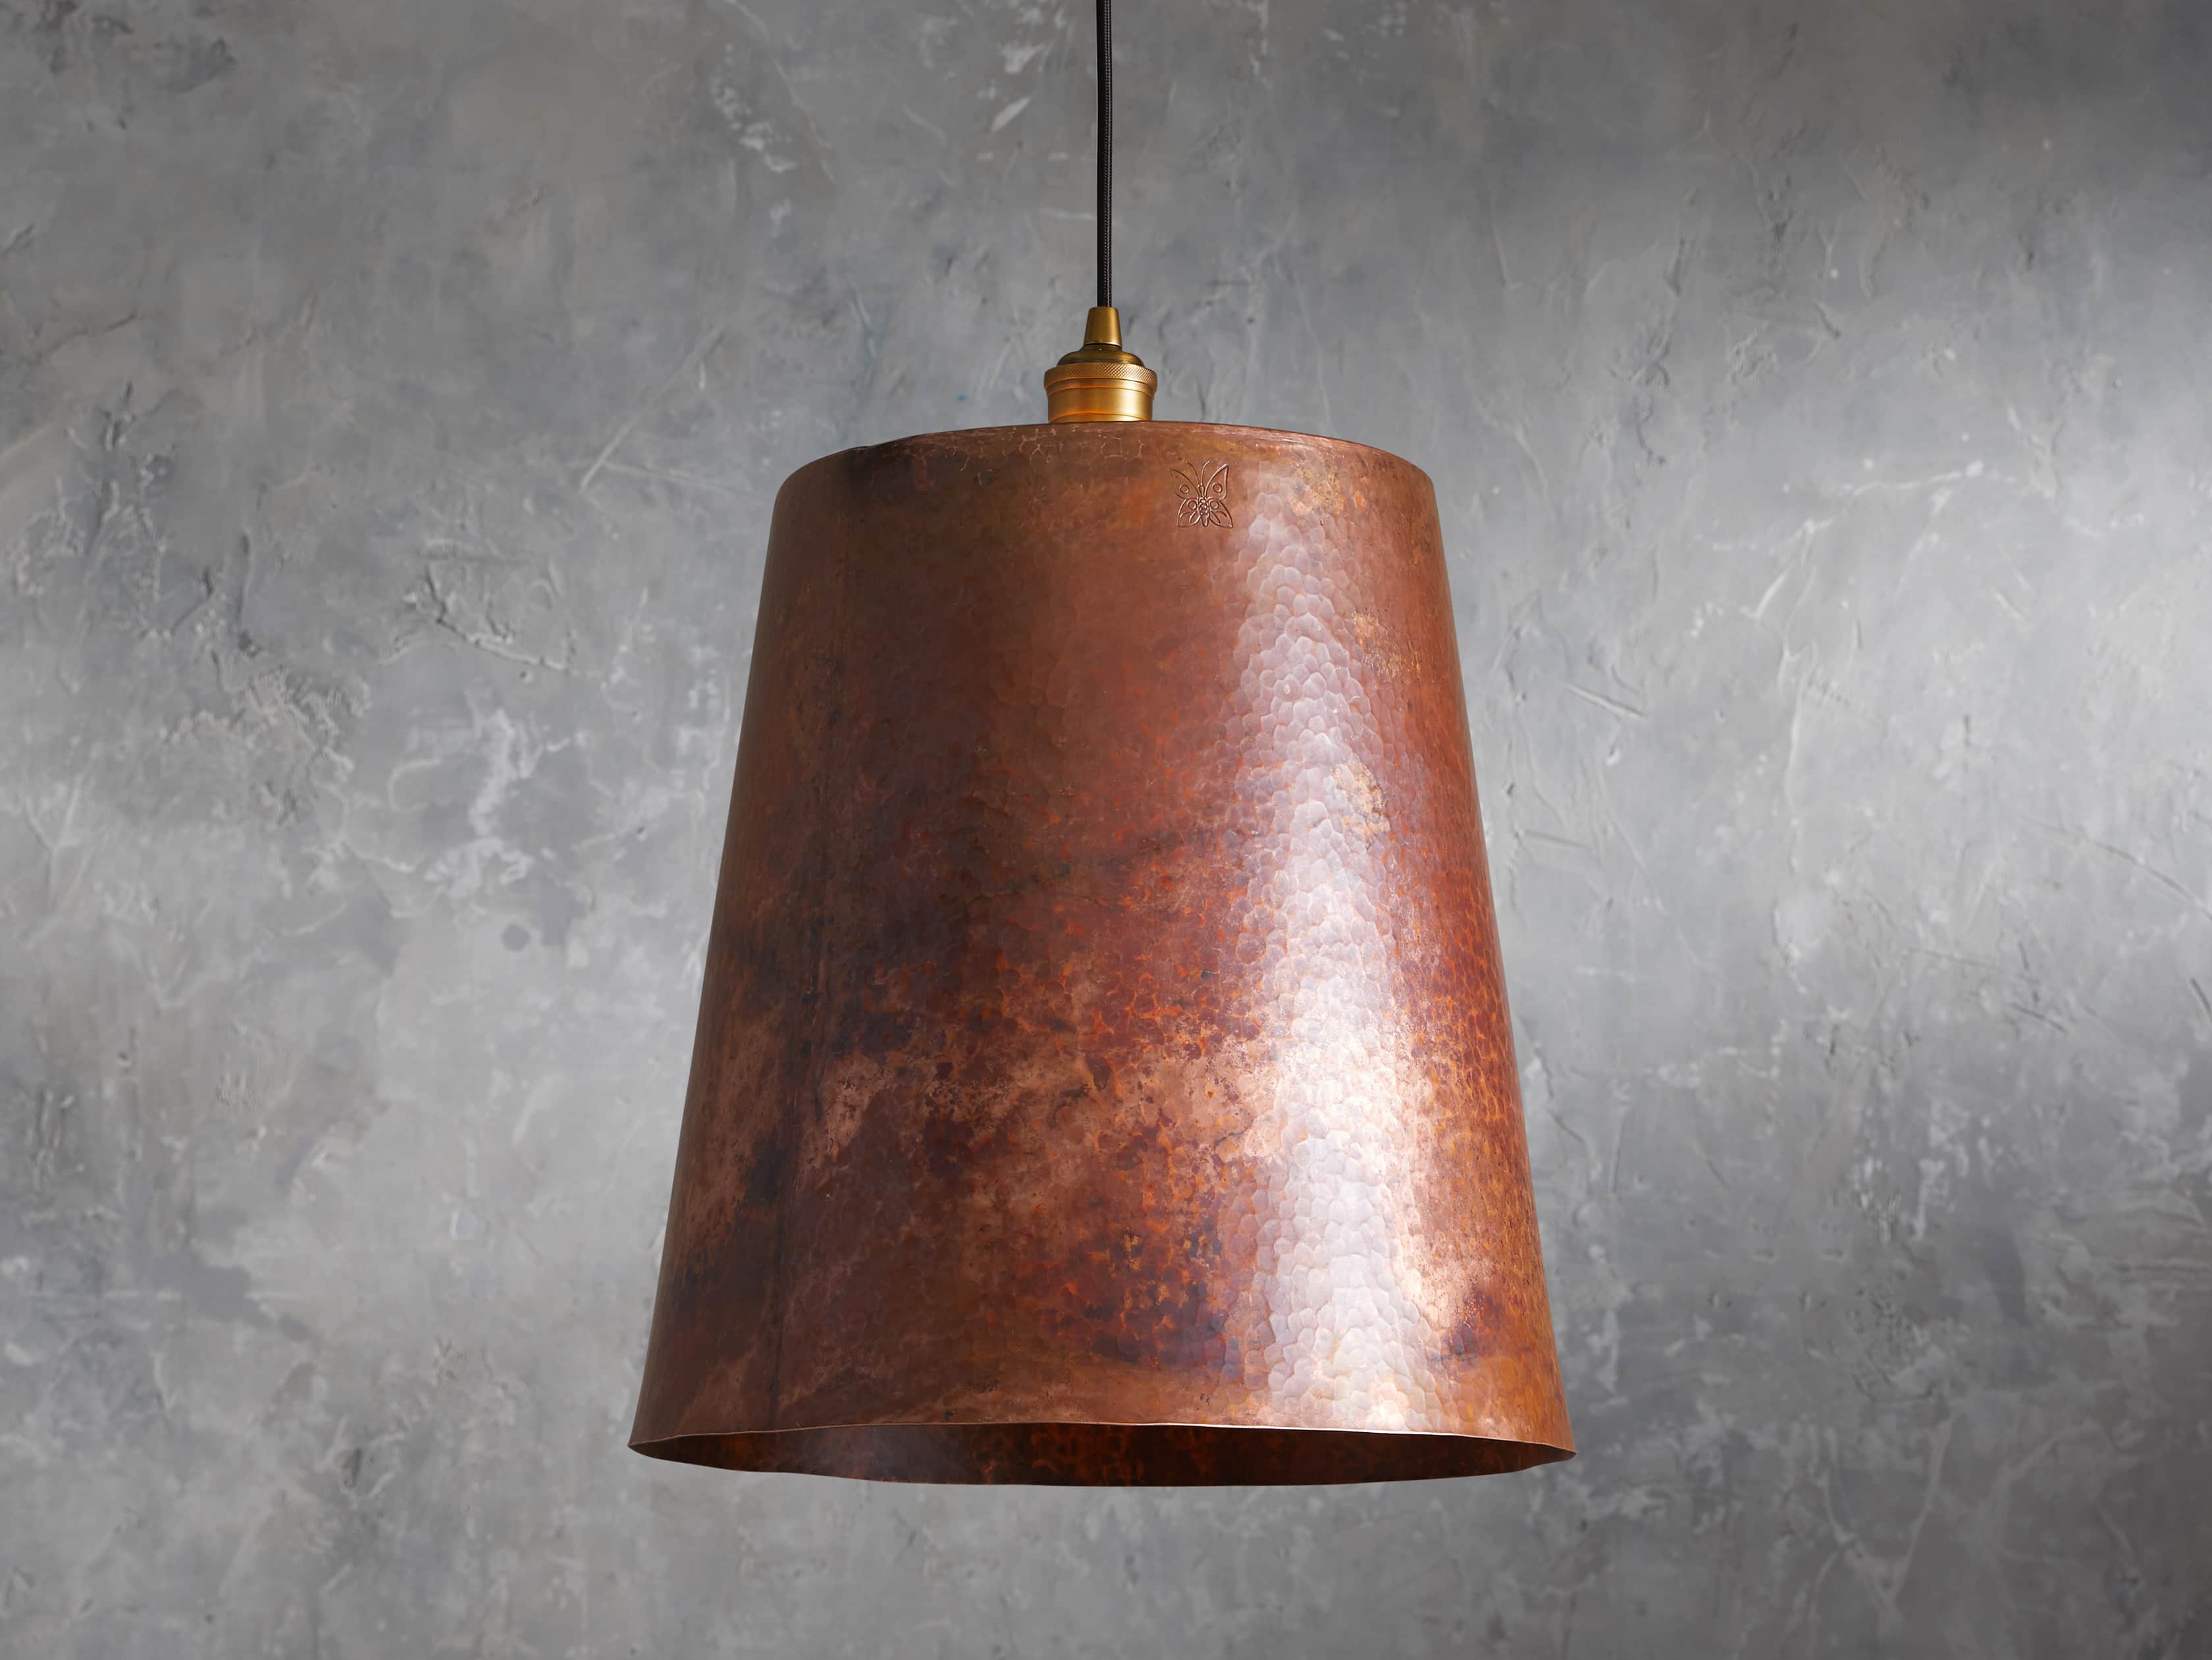 Tapered Copper Pendant Arhaus - Copper Pendant Ceiling Light Fitting Instructions Pdf